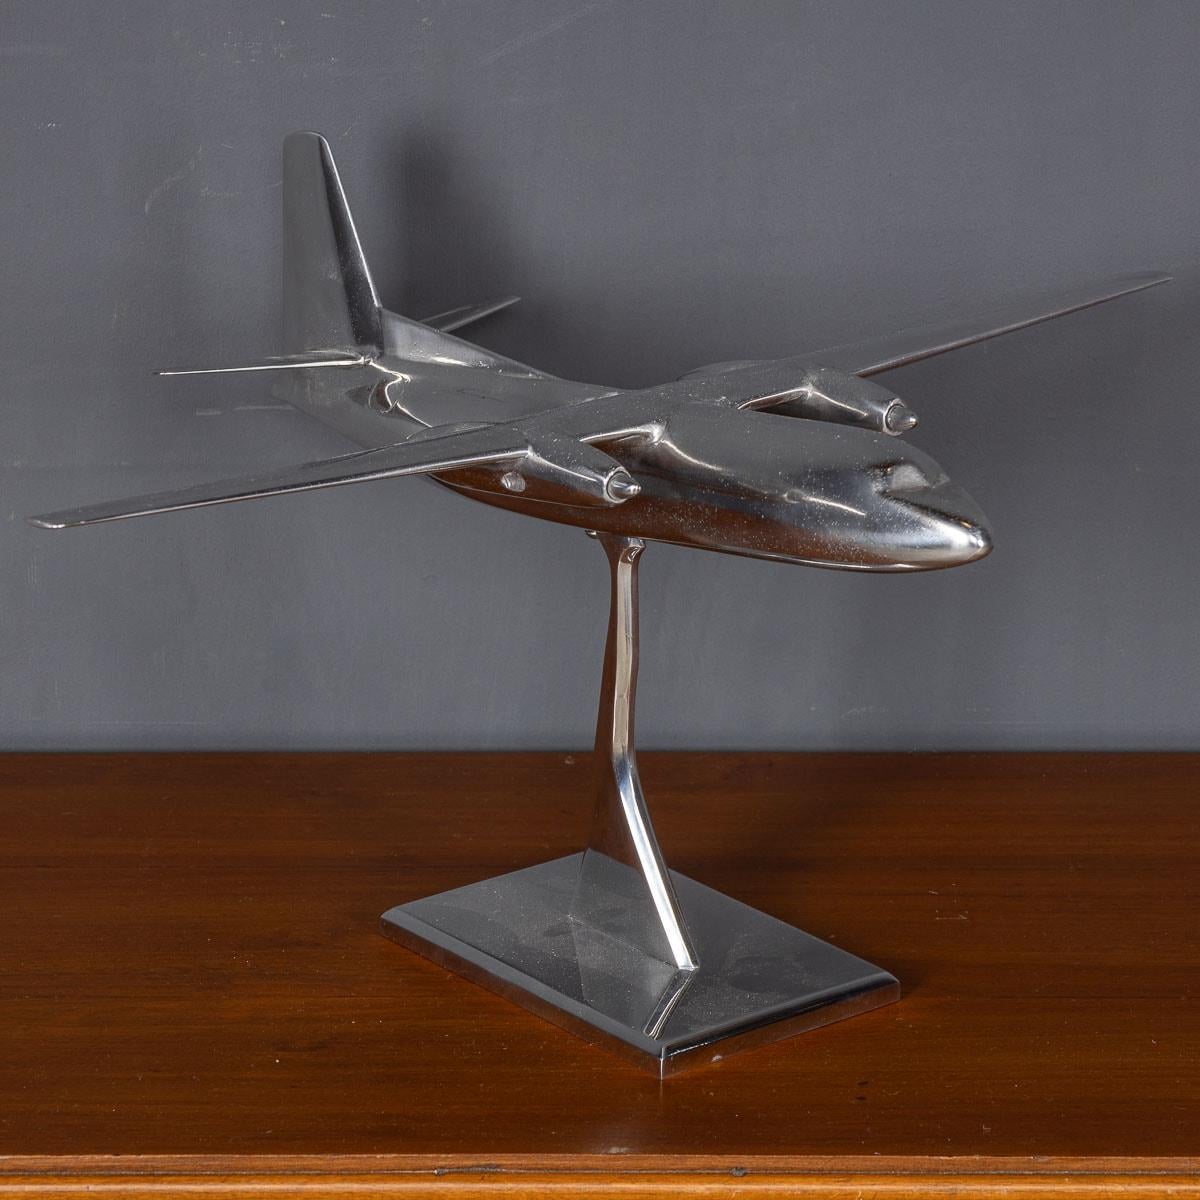 An exquisite 20th Century model of a small passenger plane, expertly crafted from aluminium and presented on a matching aluminium base. This remarkable piece serves as a captivating focal point, perfect for sparking intriguing conversations, and it